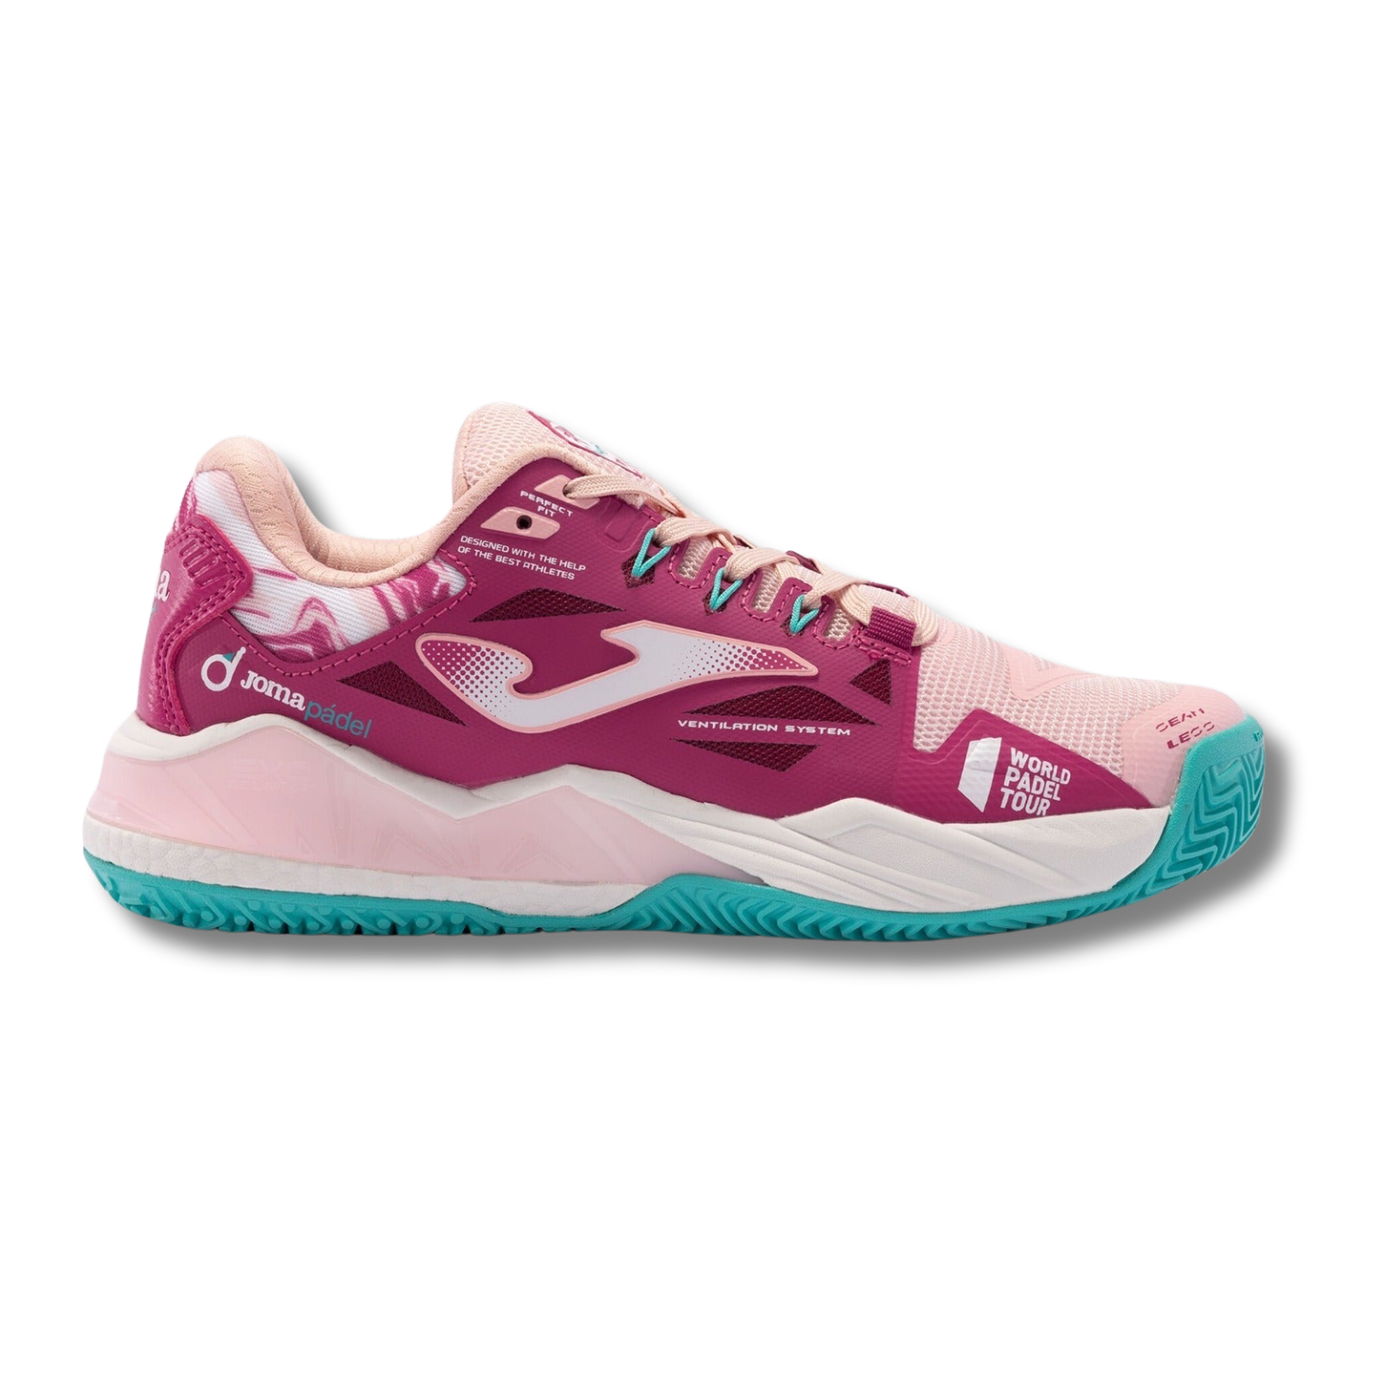 Joma T.SPIN Lady 2313 PINK Padel Shoe